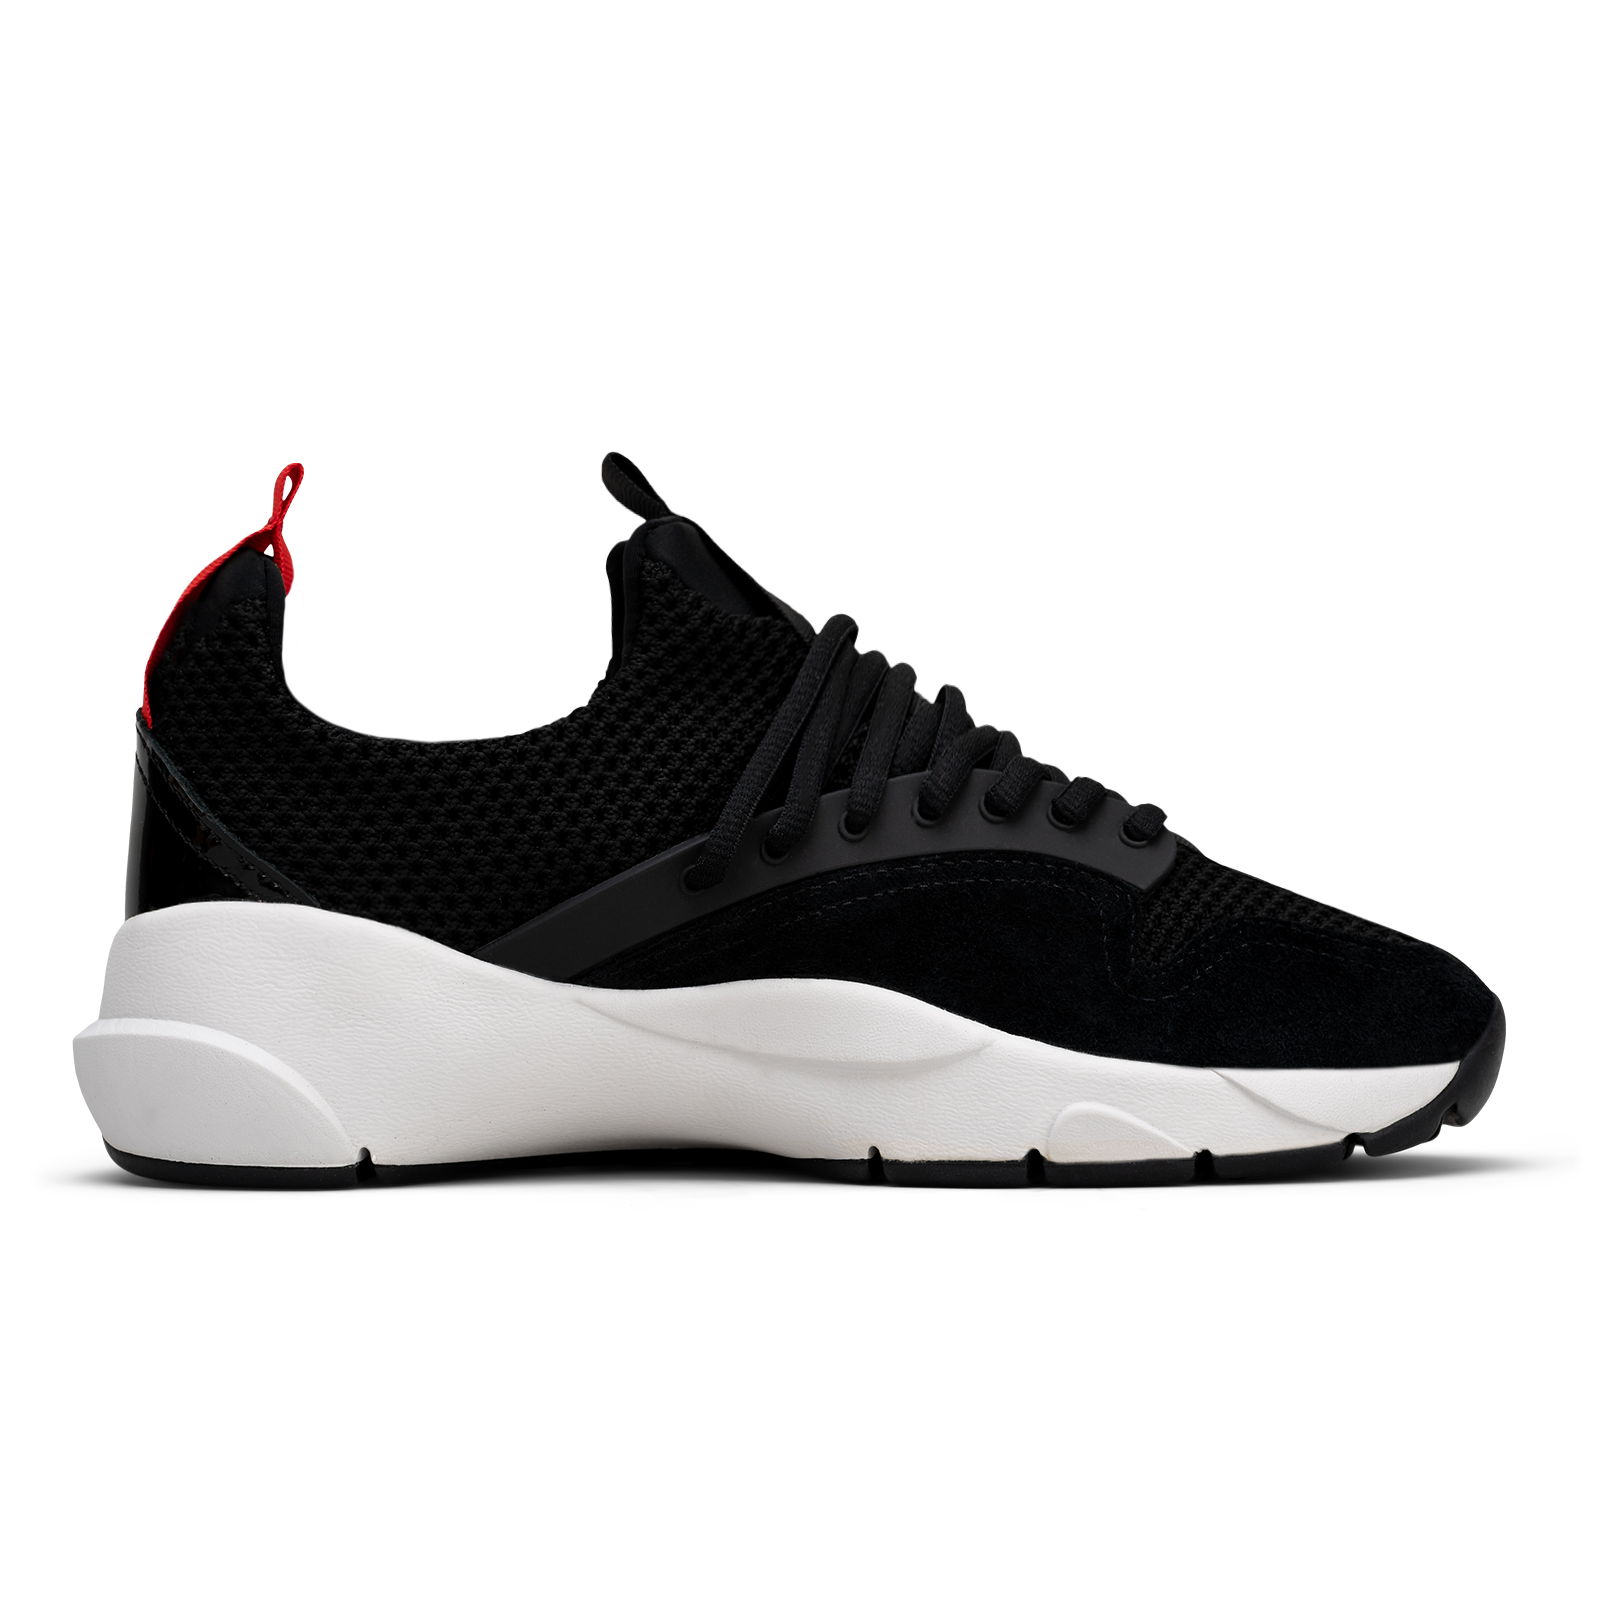 Inside view. Cloudstryk Advantage is a runner with Black patent leather and suede overlays zoom mesh underlays, red heel pull molded lace holder, white eva midsol and a translucent black rubber outsole.